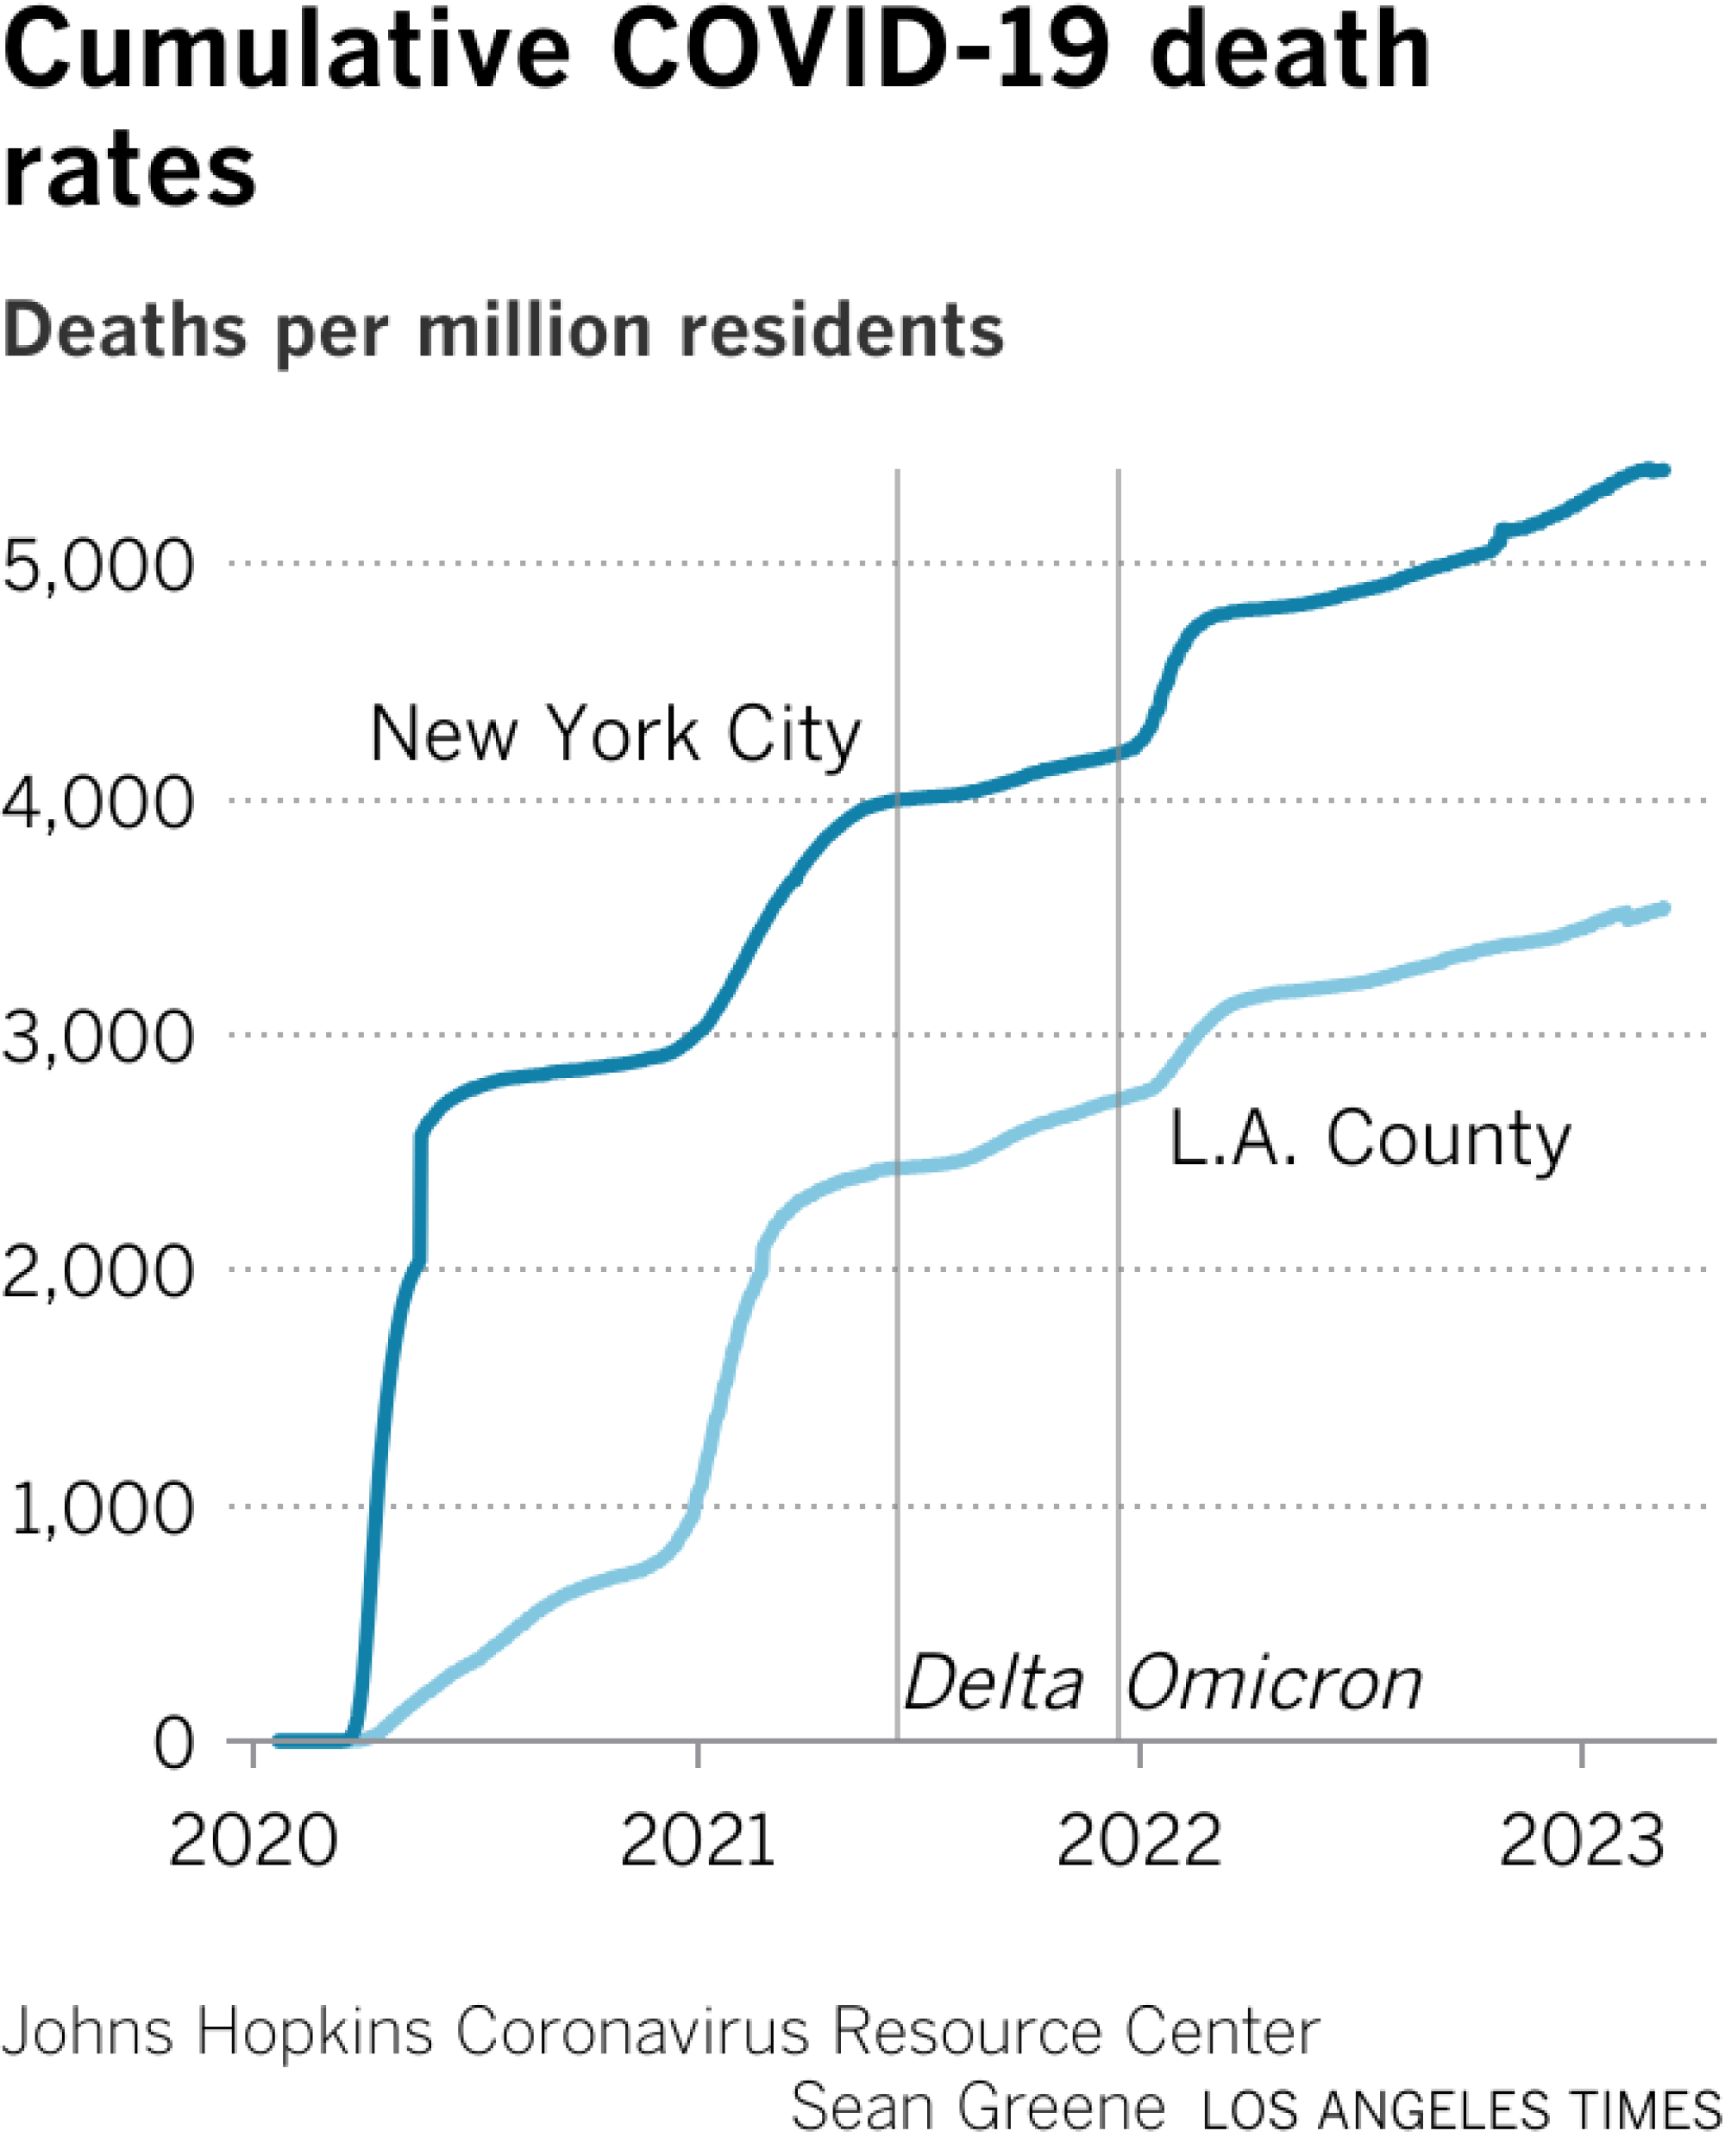 Line chart compares COVID-19 death rates in New York City and Los Angeles County. New York saw an early spike in deaths compared to Los Angeles. New York City's death rate was always higher than that of Los Angeles County.